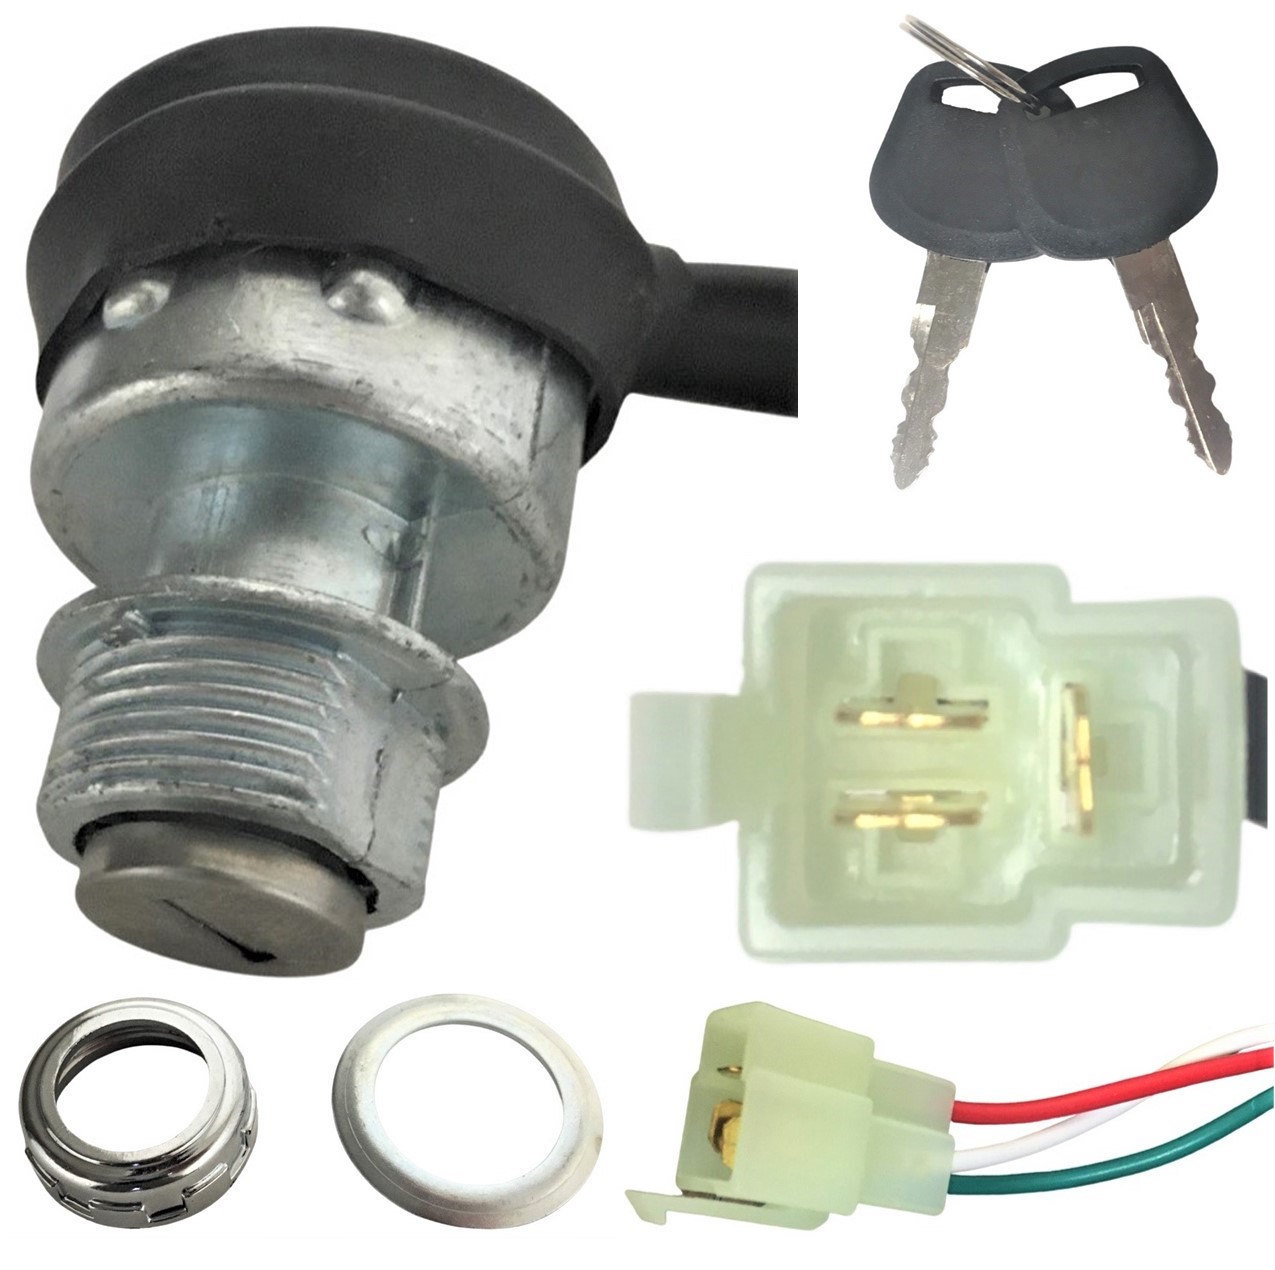 Ignition Switch Fits Many ATV-GoKarts-Dirtbikes 3 Pins in 3 Pin Female Jack - Click Image to Close